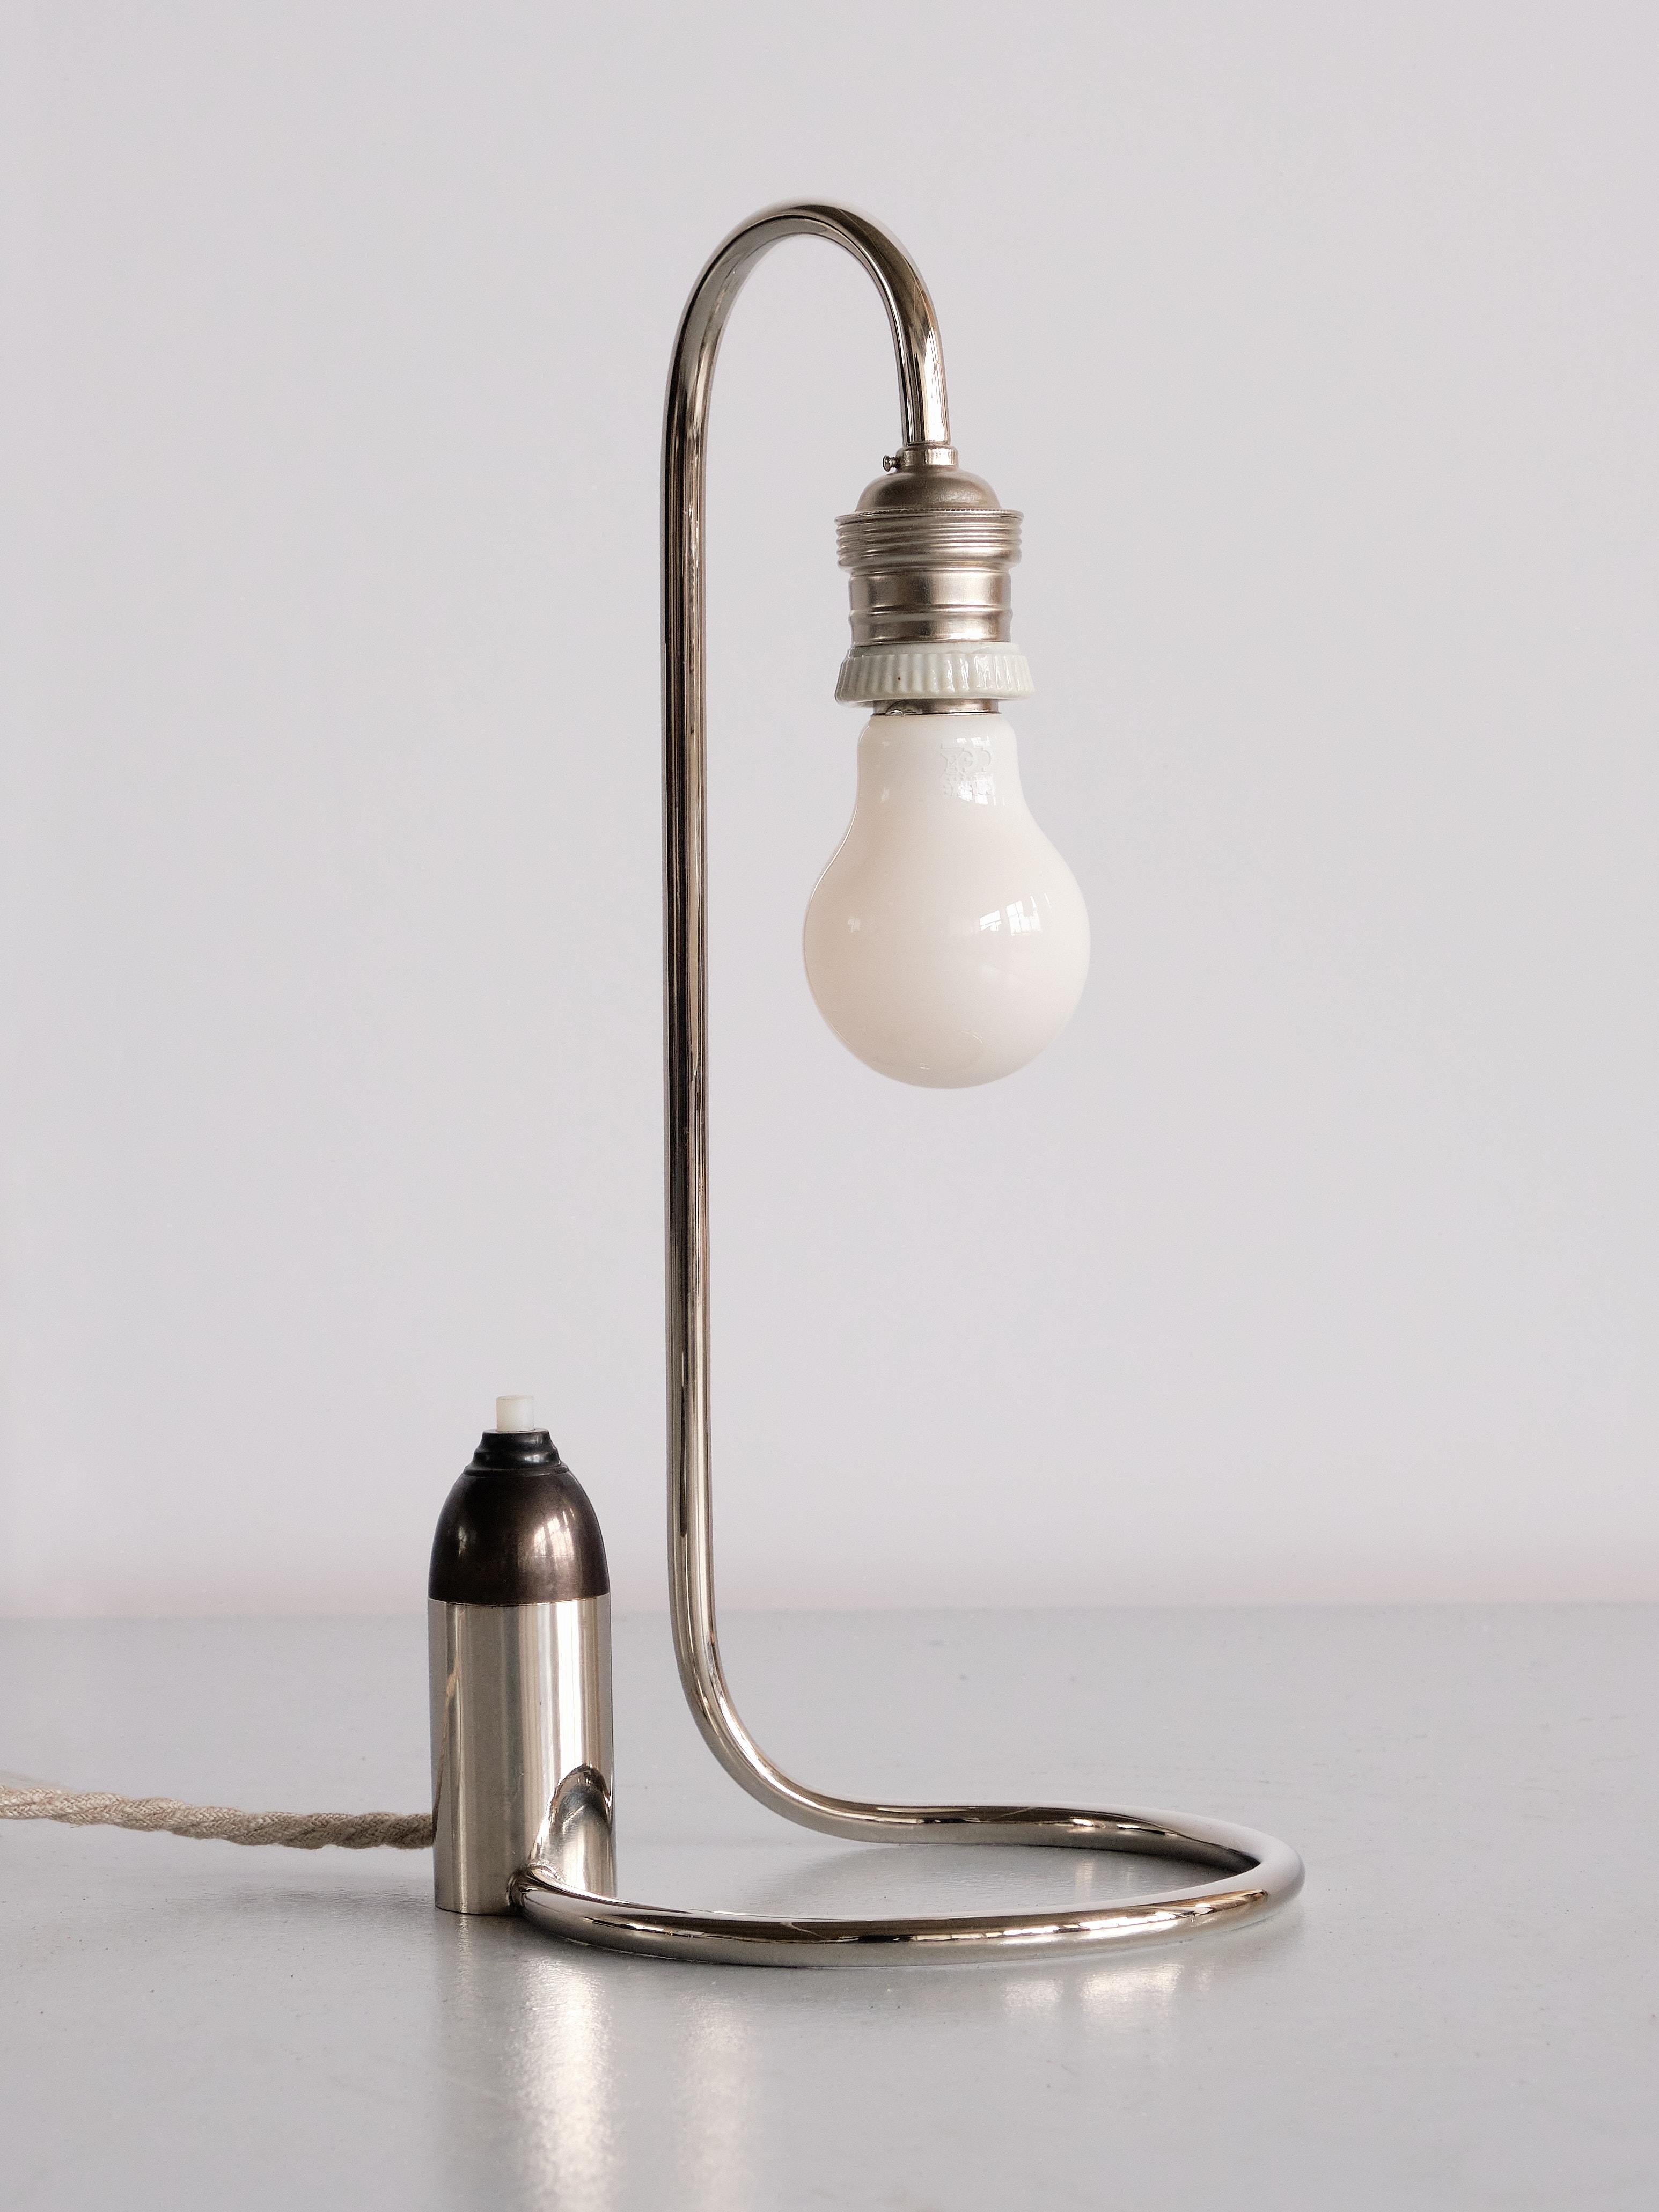 An important example of perfect simplicity, this lamp was designed by Sybold van Ravesteyn in 1926. Made of chrome-plated nickel, the design is now officially re-issued by Giso Verlichting in a limited edition. An iconic 